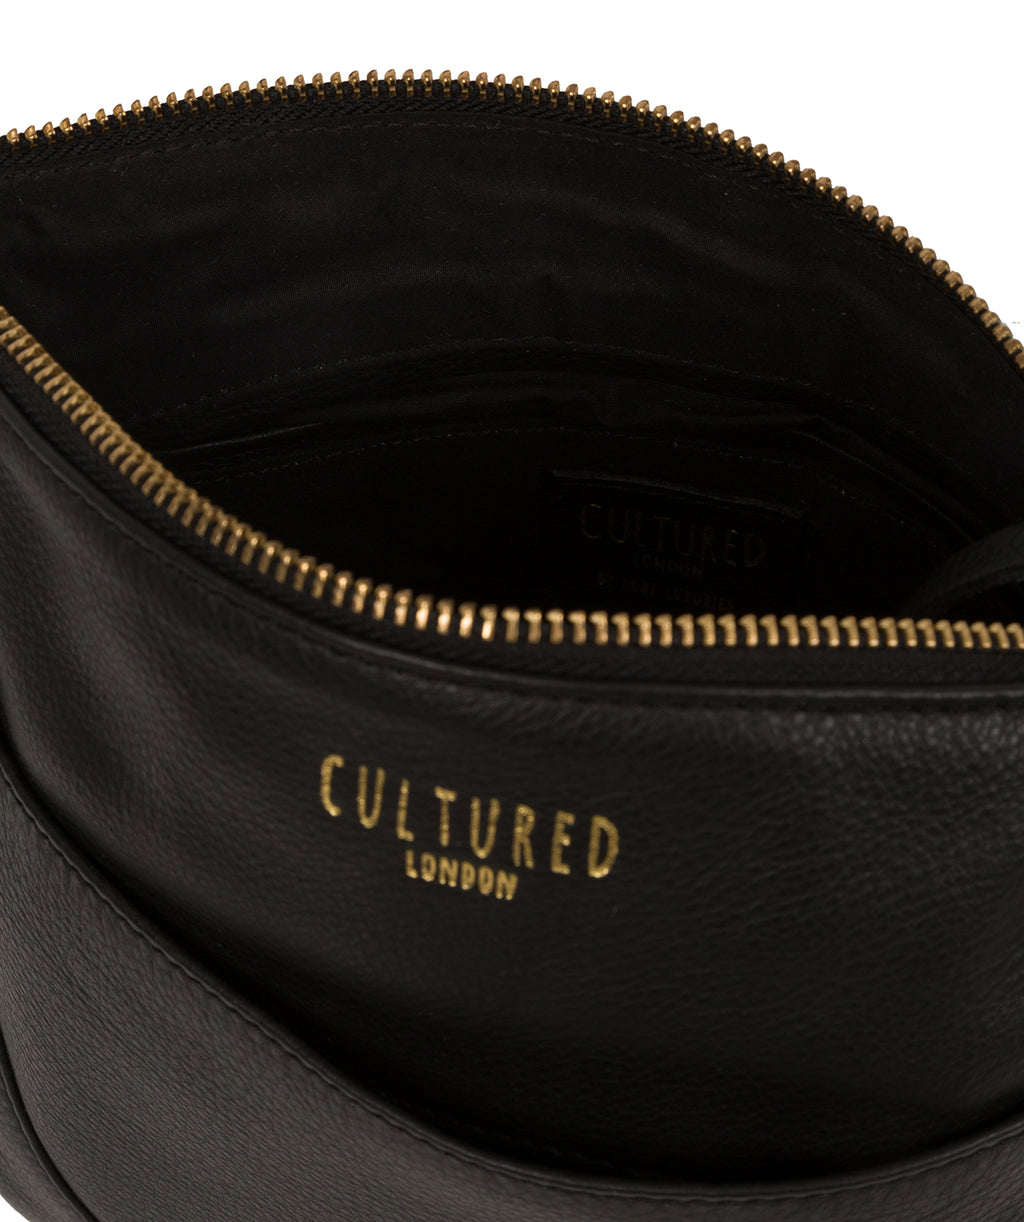 Black Leather Crossbody Bag 'Camden' by Cultured London – Pure Luxuries ...